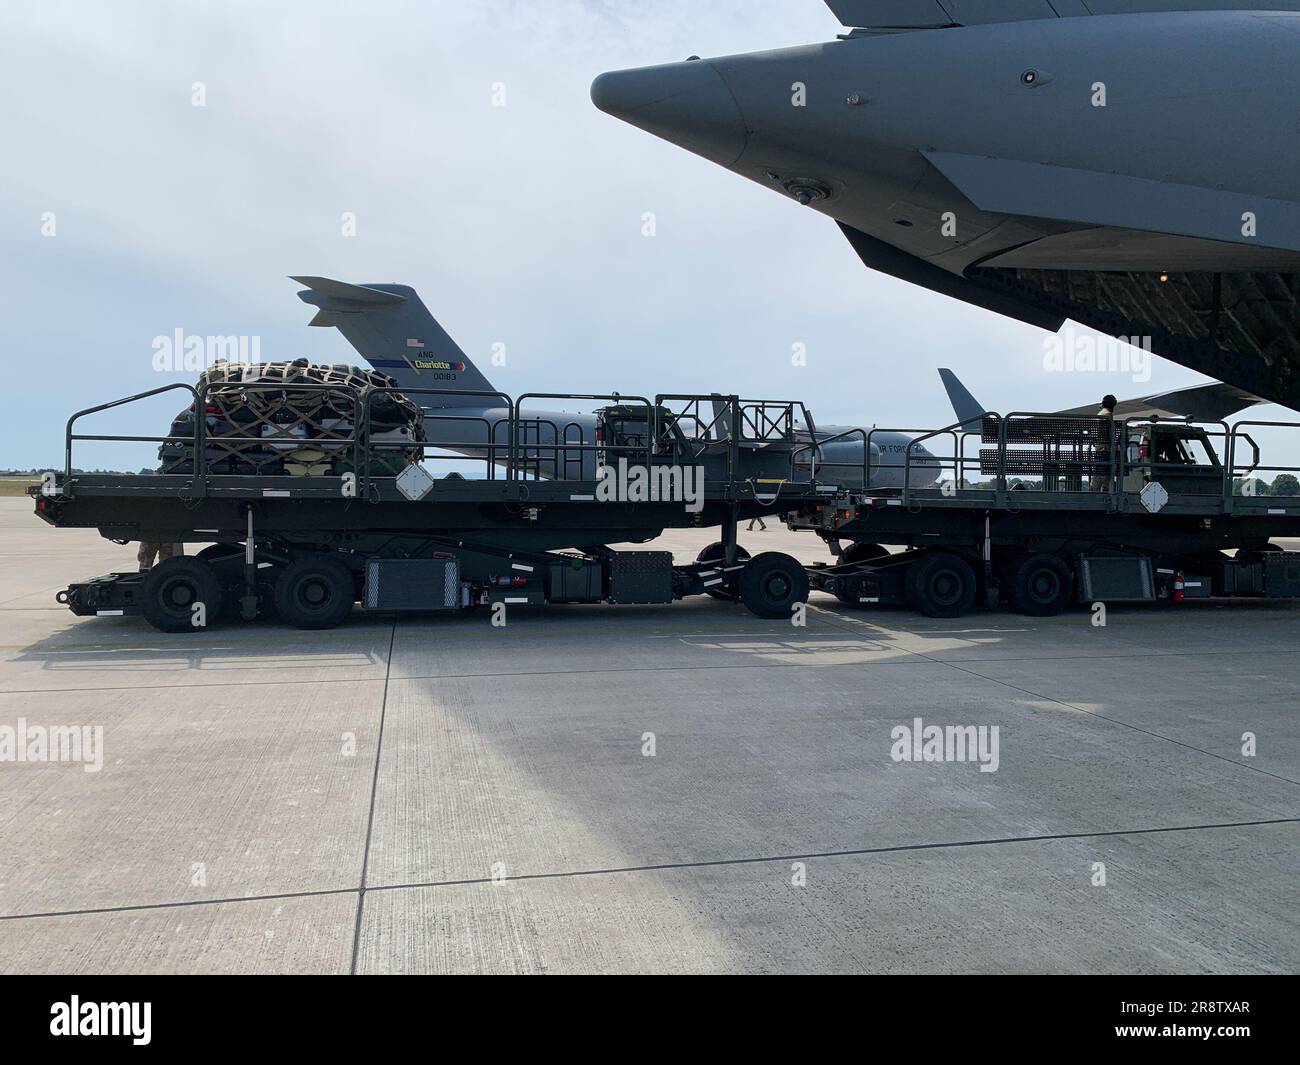 U.S. Airmen with the 123rd Contingency Response Element, 123rd Airlift Wing, Kentucky National Guard, prepare to off-load cargo in preparation for exercise Air Defender 2023 (AD23) at Wunstorf Air Base, Germany, June 1, 2023. Exercise AD23 integrates both U.S and allied air-power to defend shared values, while leveraging and strengthening vital partnerships to deter aggression around the world. (U.S. Air National Guard photo by Senior Master Sgt. Vicky Spesard) Stock Photo